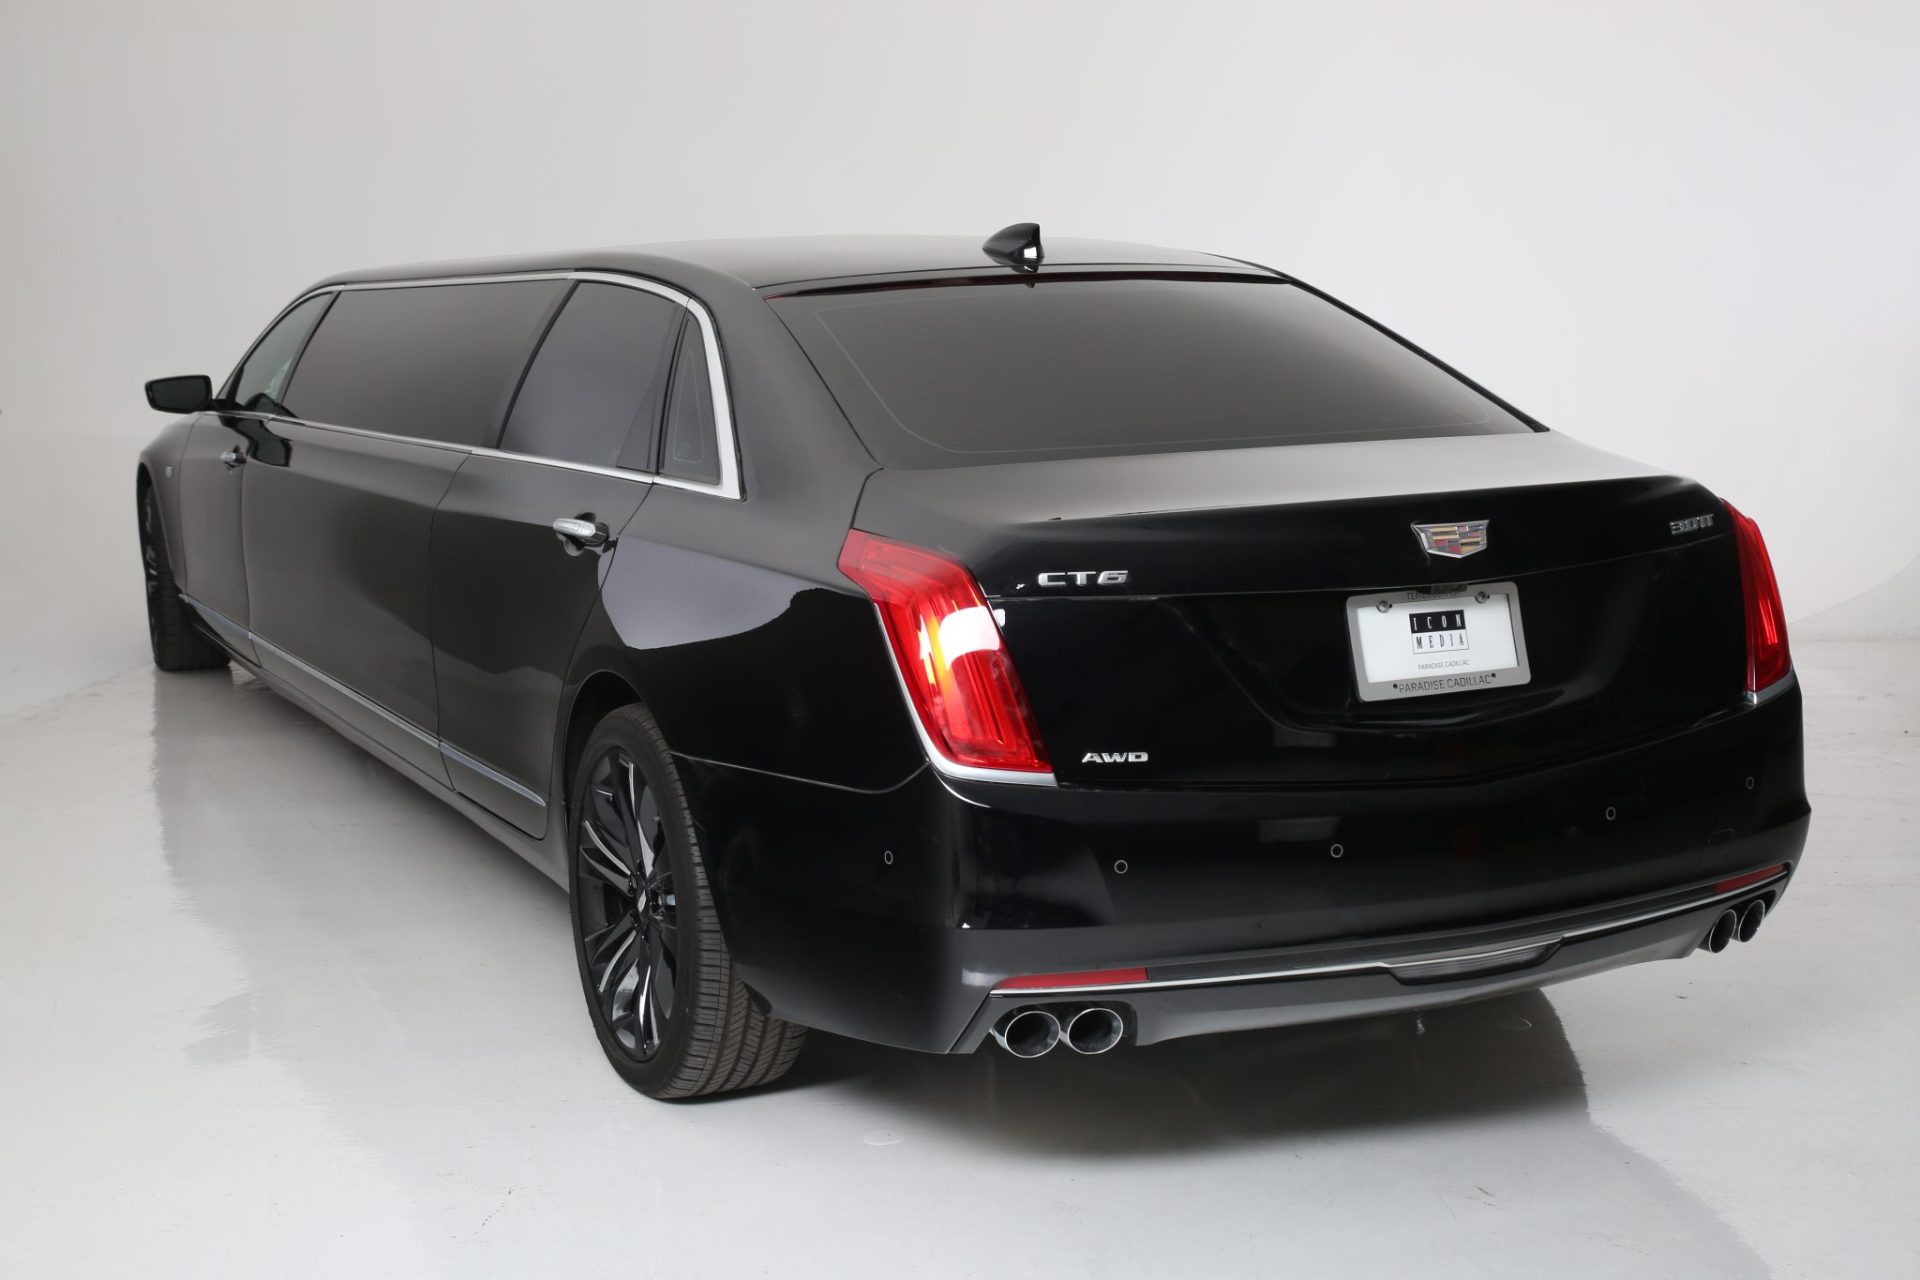 Cadillac CT6-V Stretched Limousine - Exterior Photo #8